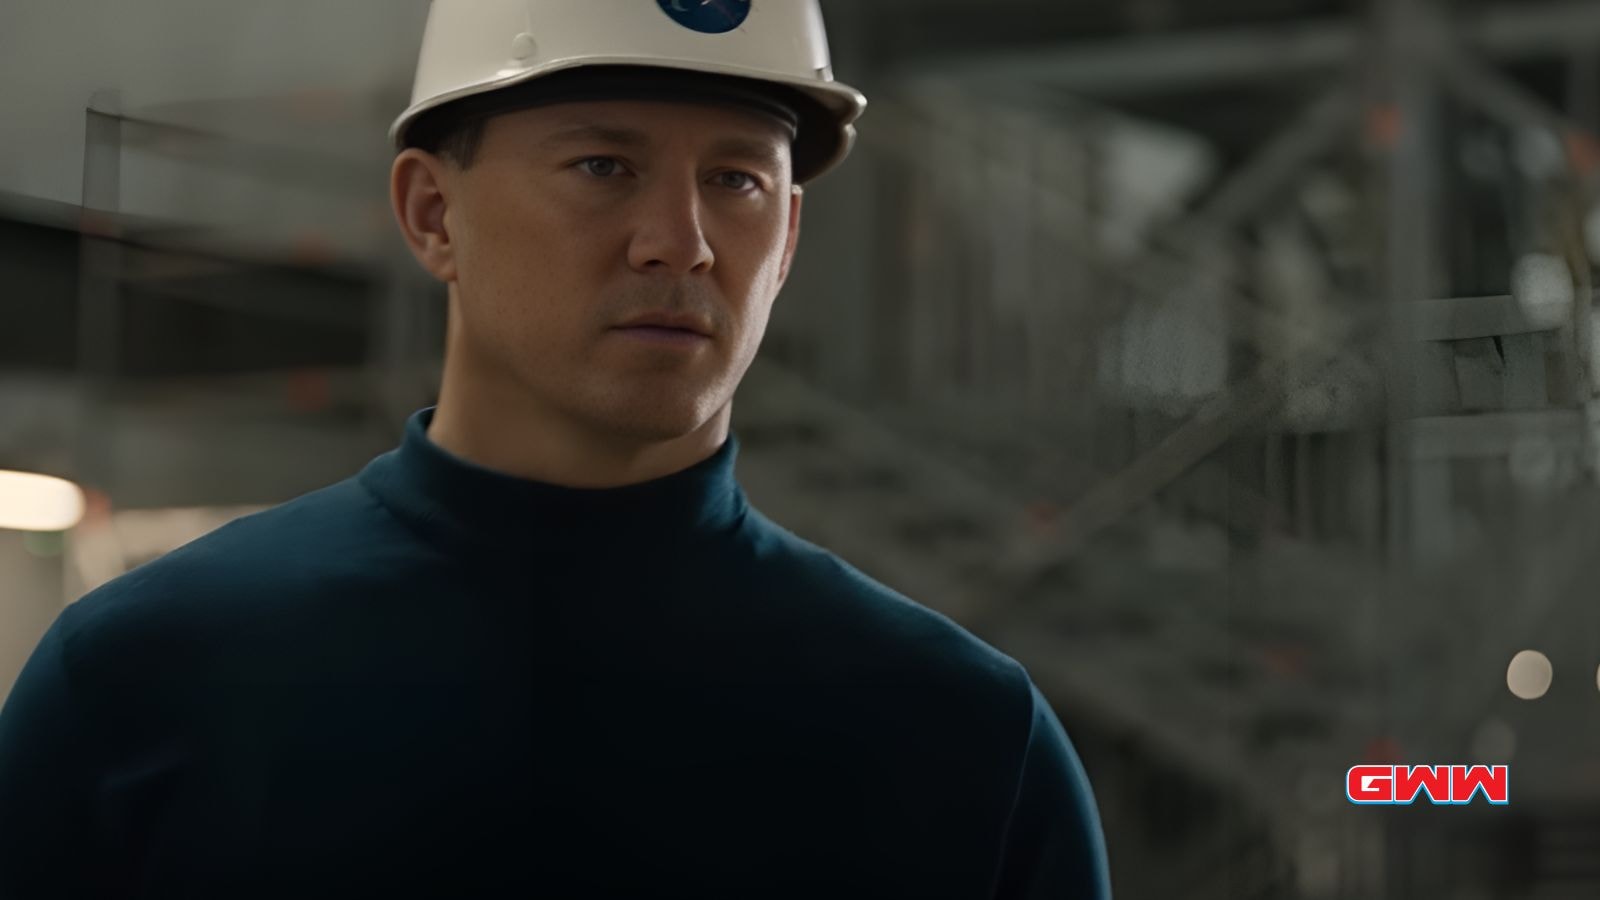 Cole in a white hard hat and blue shirt, standing in an industrial setting.